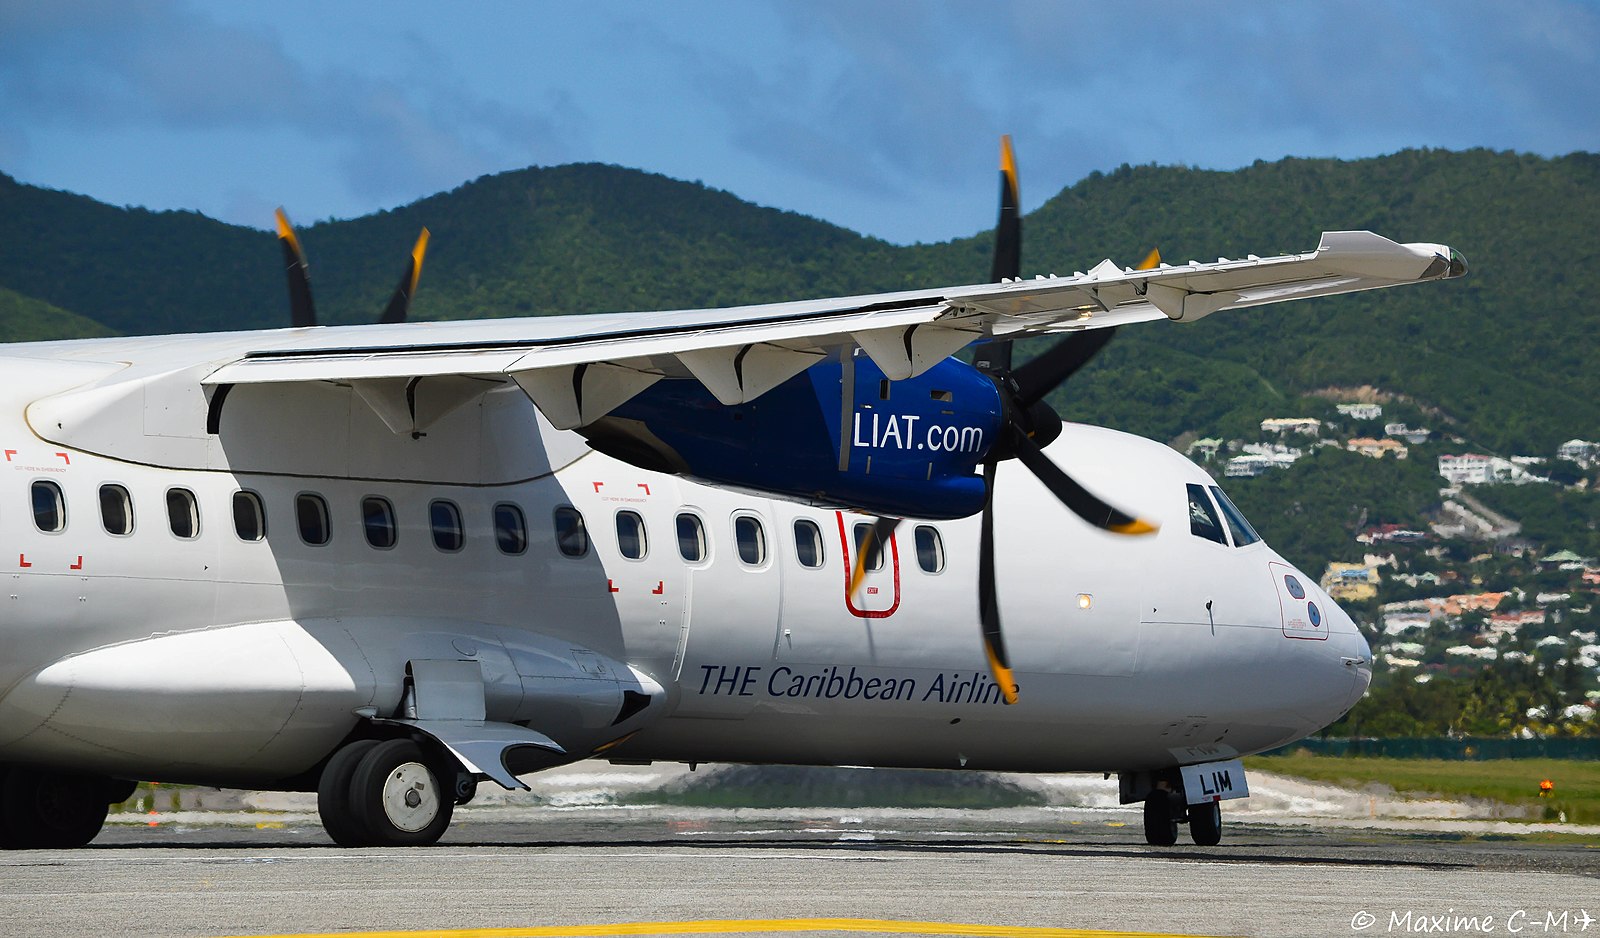 LIAT forced to suspend services to Barbados and St. Vincent